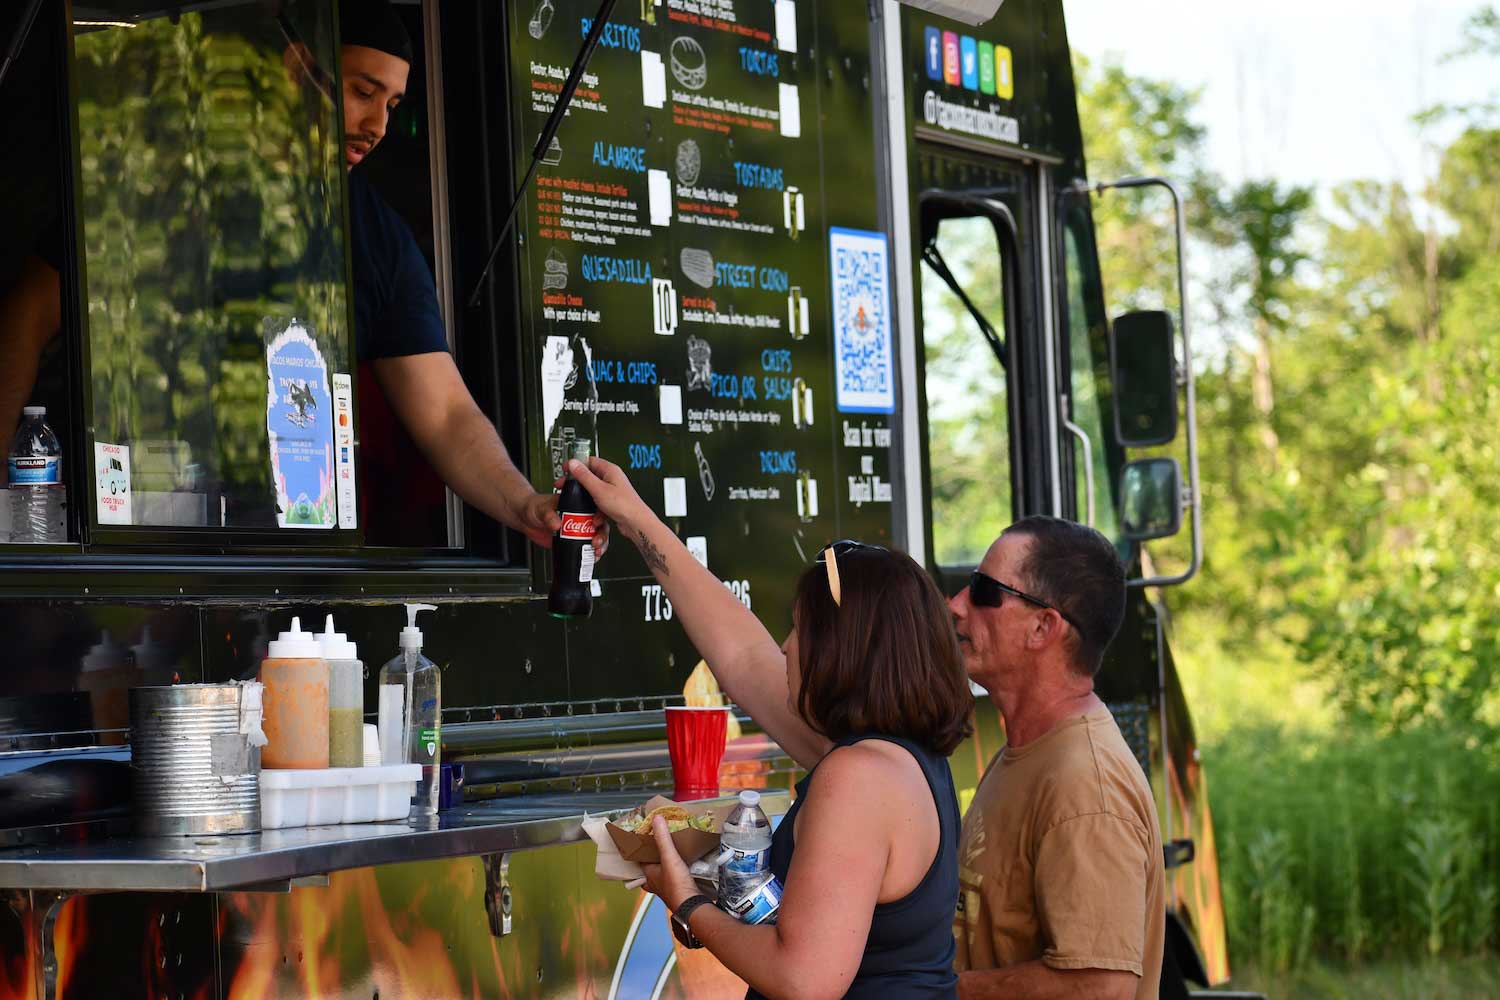 Two people standing at the window of a food truck while an employee passes them a drink.